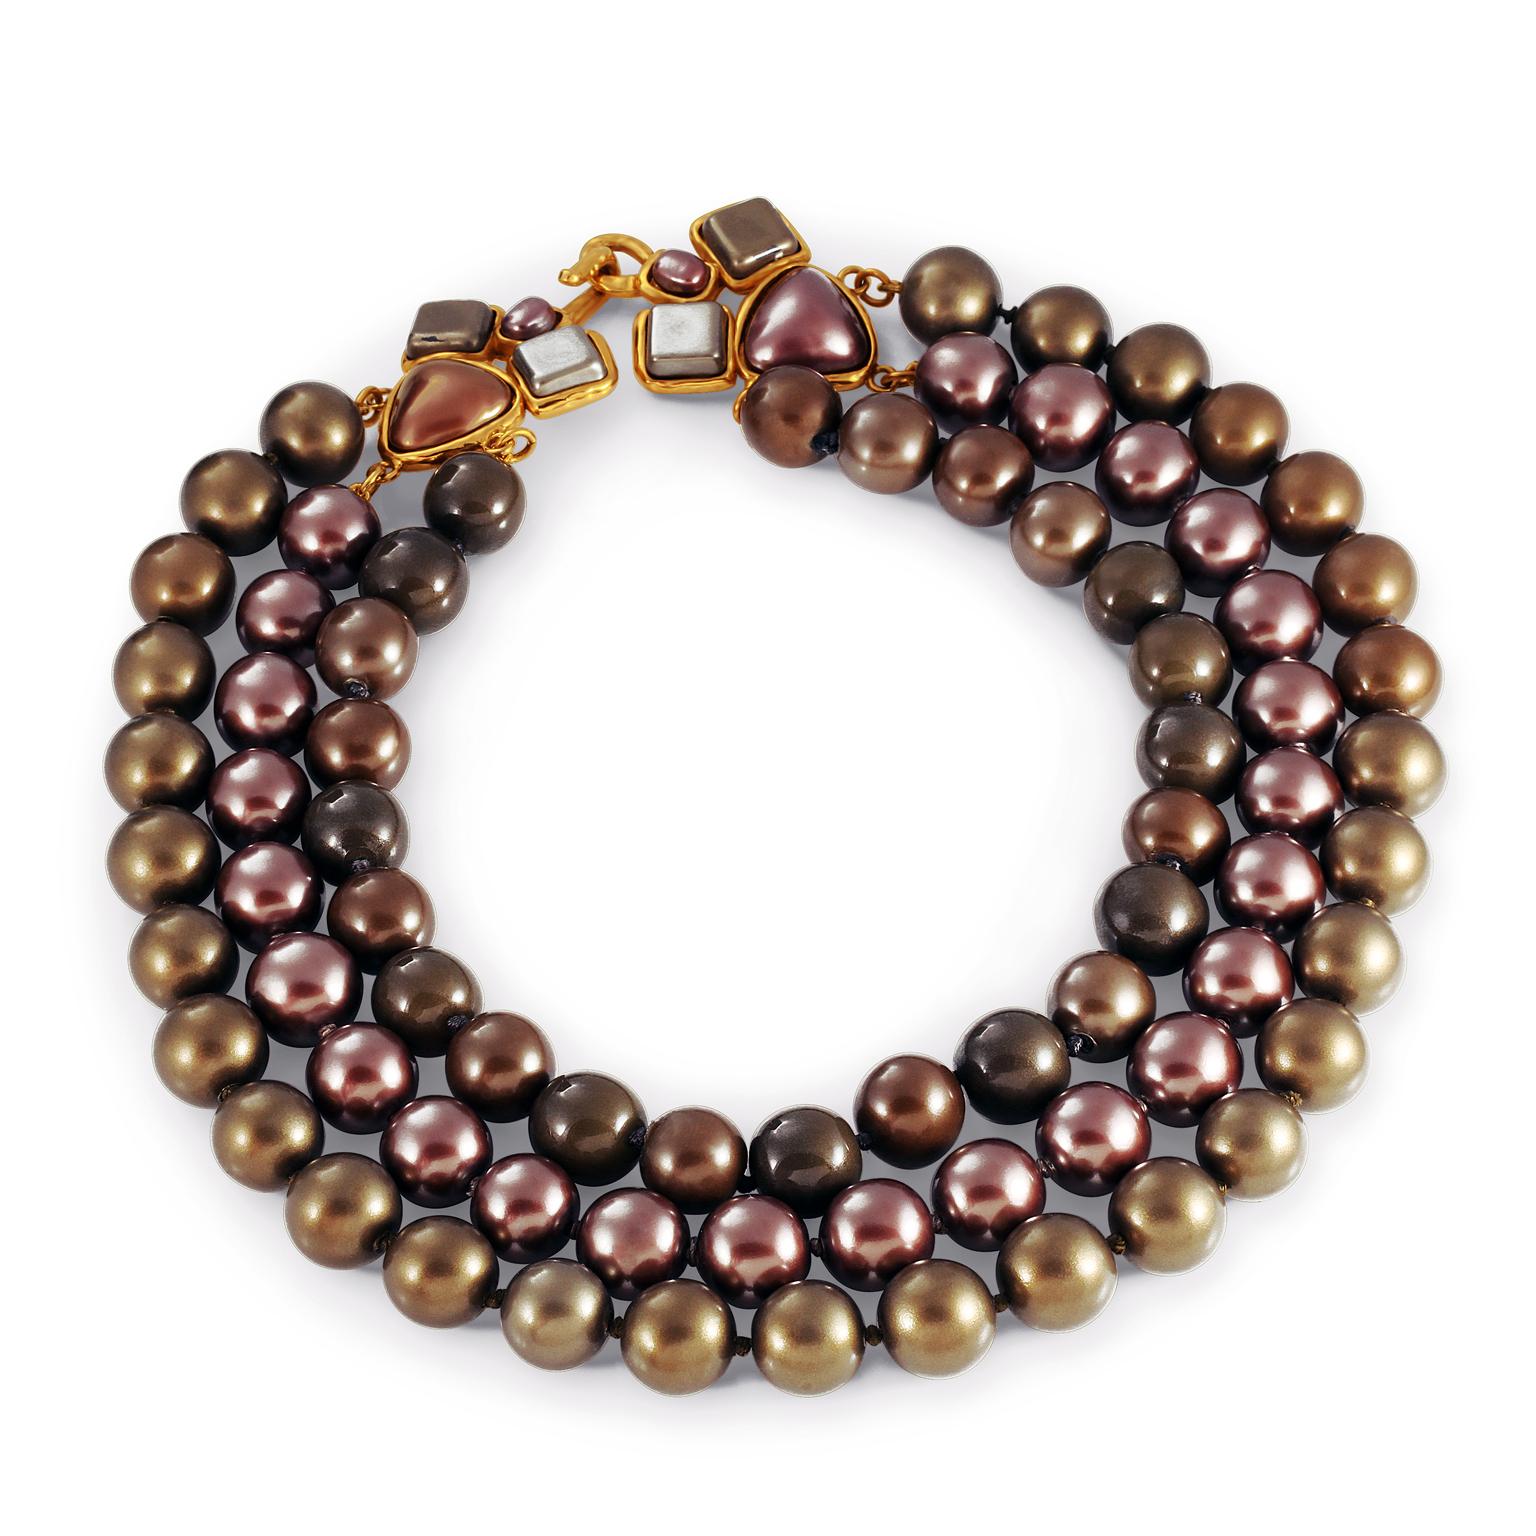 This authentic Chanel Tri Color Triple Row Necklace is in excellent condition from the early 1990’s.  Three rows of beads create a statement choker.  Subtle metallic hues of burgundy, dark chocolate and dark gold. Ornamental geometric clasp. Made in